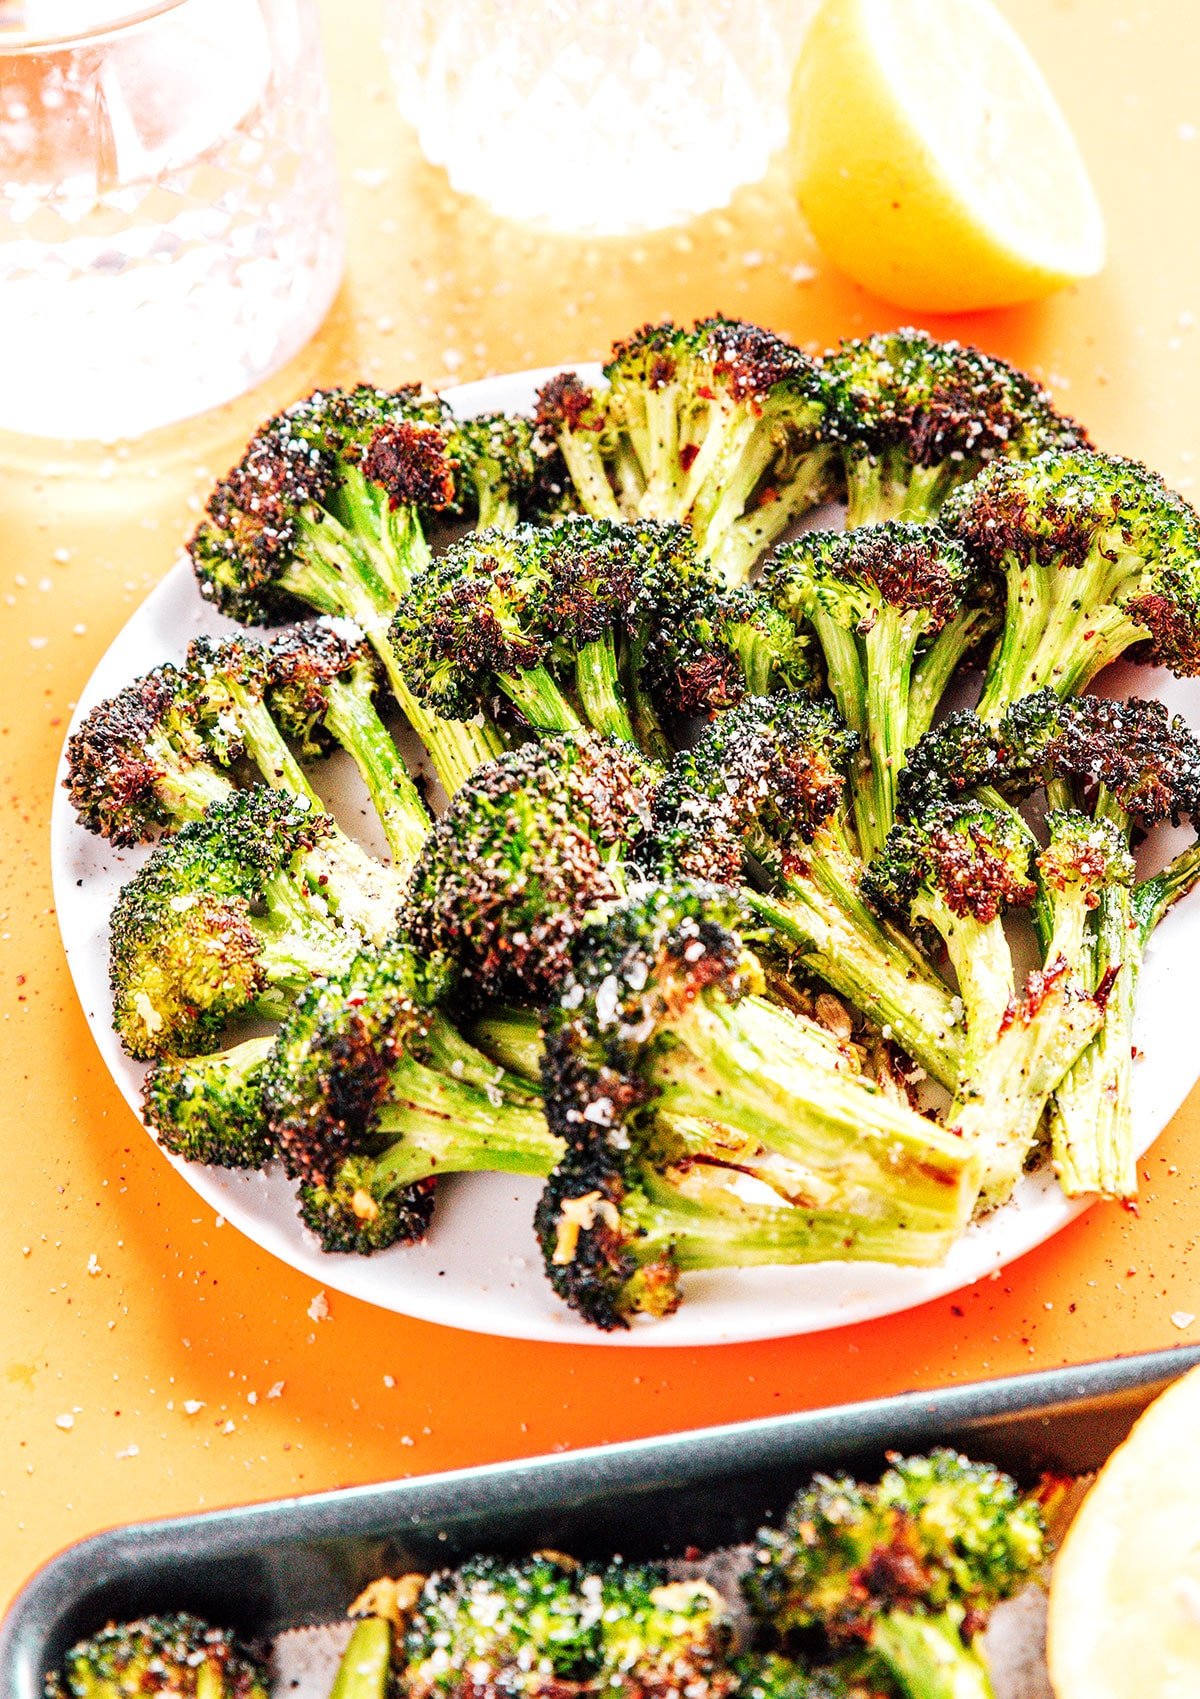 Roasted Broccoli on a plate with lemon slice behind it.